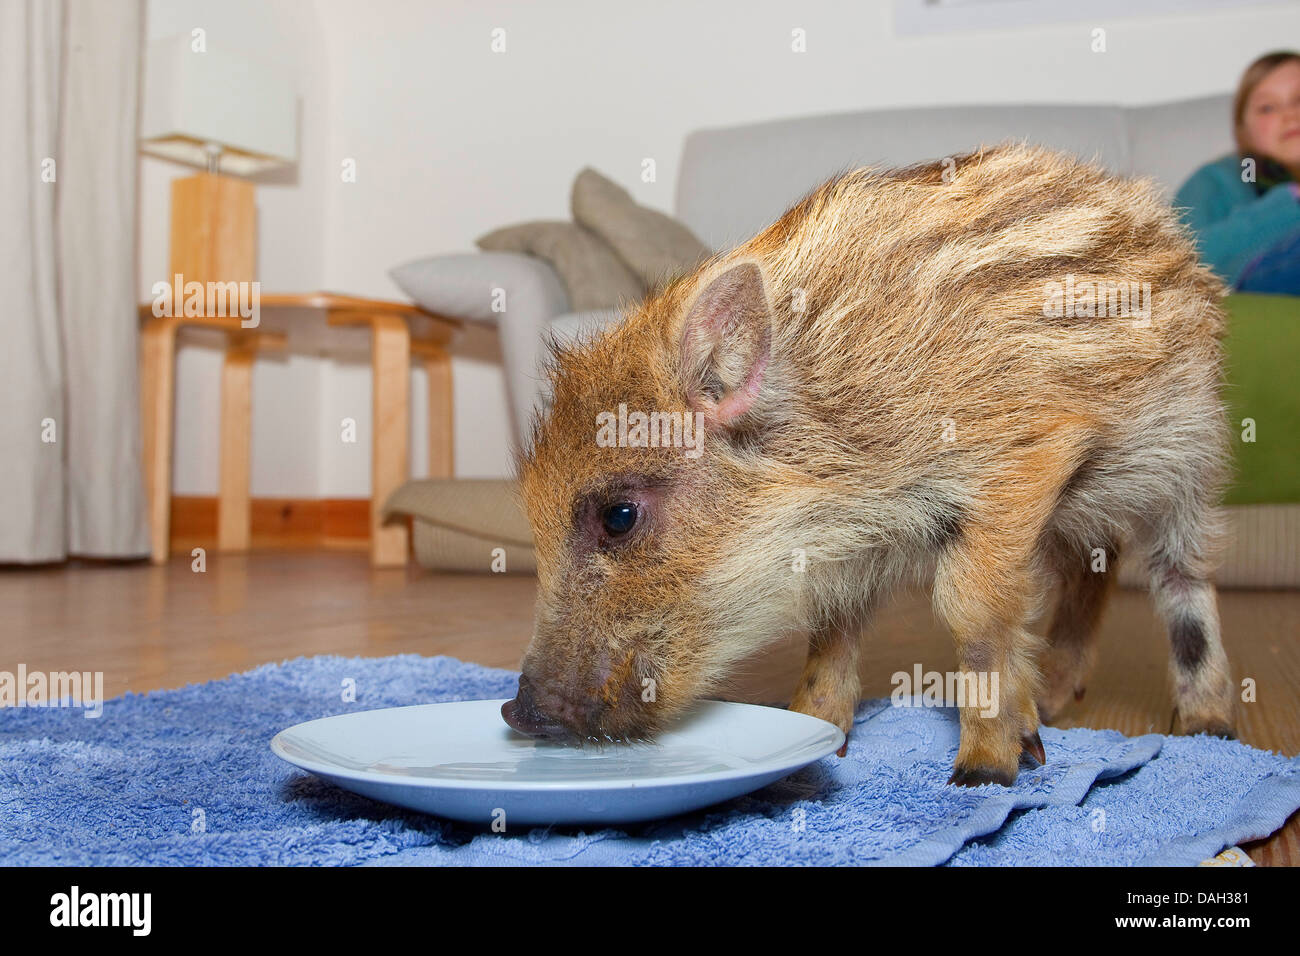 wild boar, pig, wild boar (Sus scrofa), orphaned tame runt living in a house and feeding rusk from a plate, Germany Stock Photo